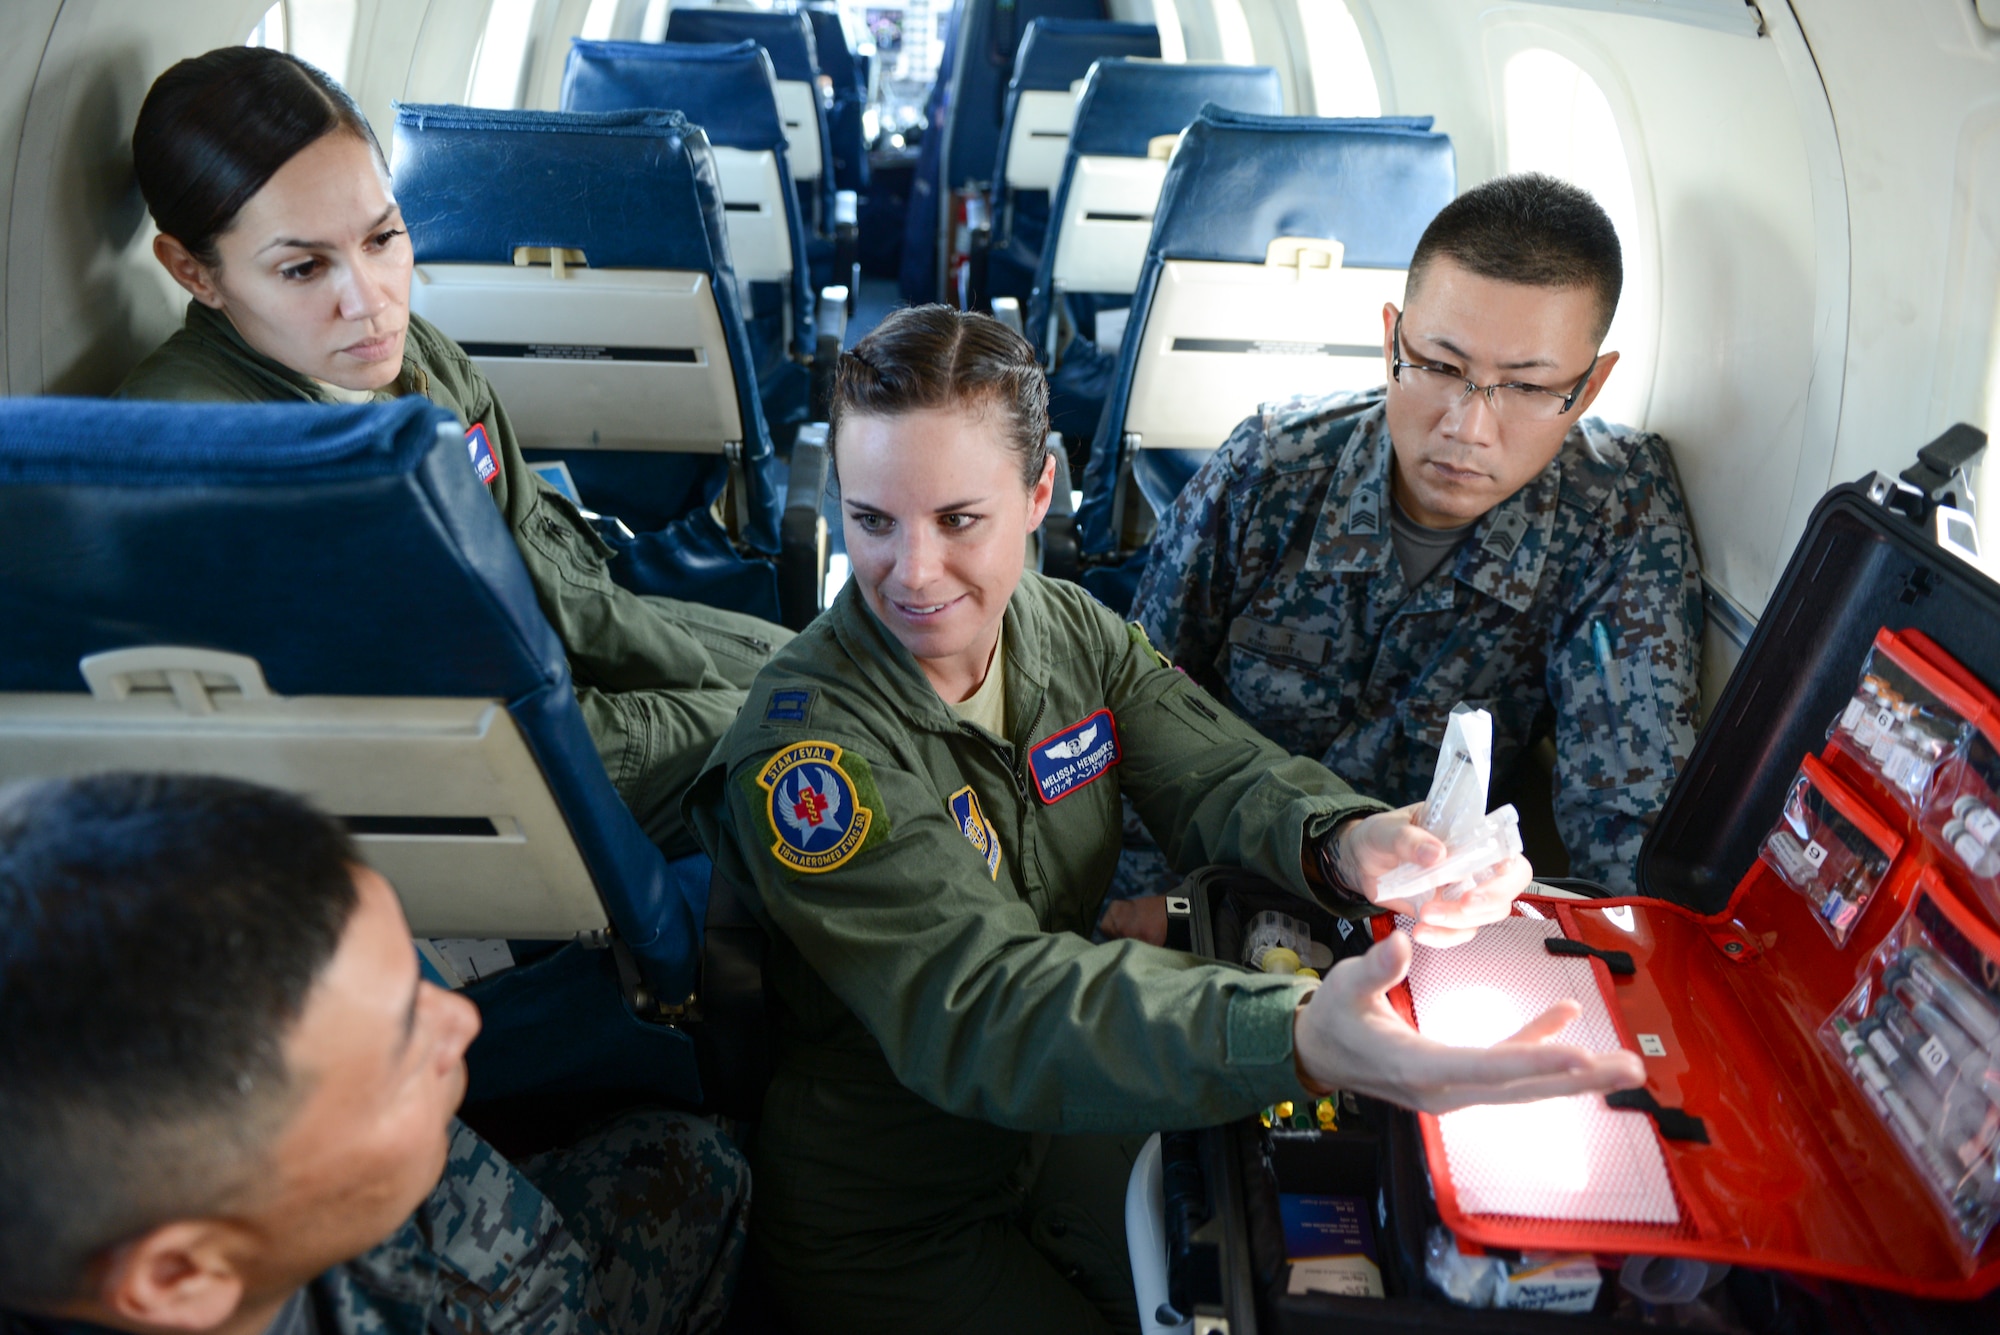 U.S. Air Force Capt. Melissa Hendricks, 18th Aeromedical Evacuation Squadron flight commander, informs a group of Japan Air Self-Defense Force members about the contents inside a medevac container at Kadena Air Base, Japan, Sept. 24, 2014. Hendricks, assisted by the 459th Airlift Squadron, highlighted the C-12 medevac capabilities to the JASDF members. (U.S. Air Force photo by Staff Sgt. Cody H. Ramirez/Released) 